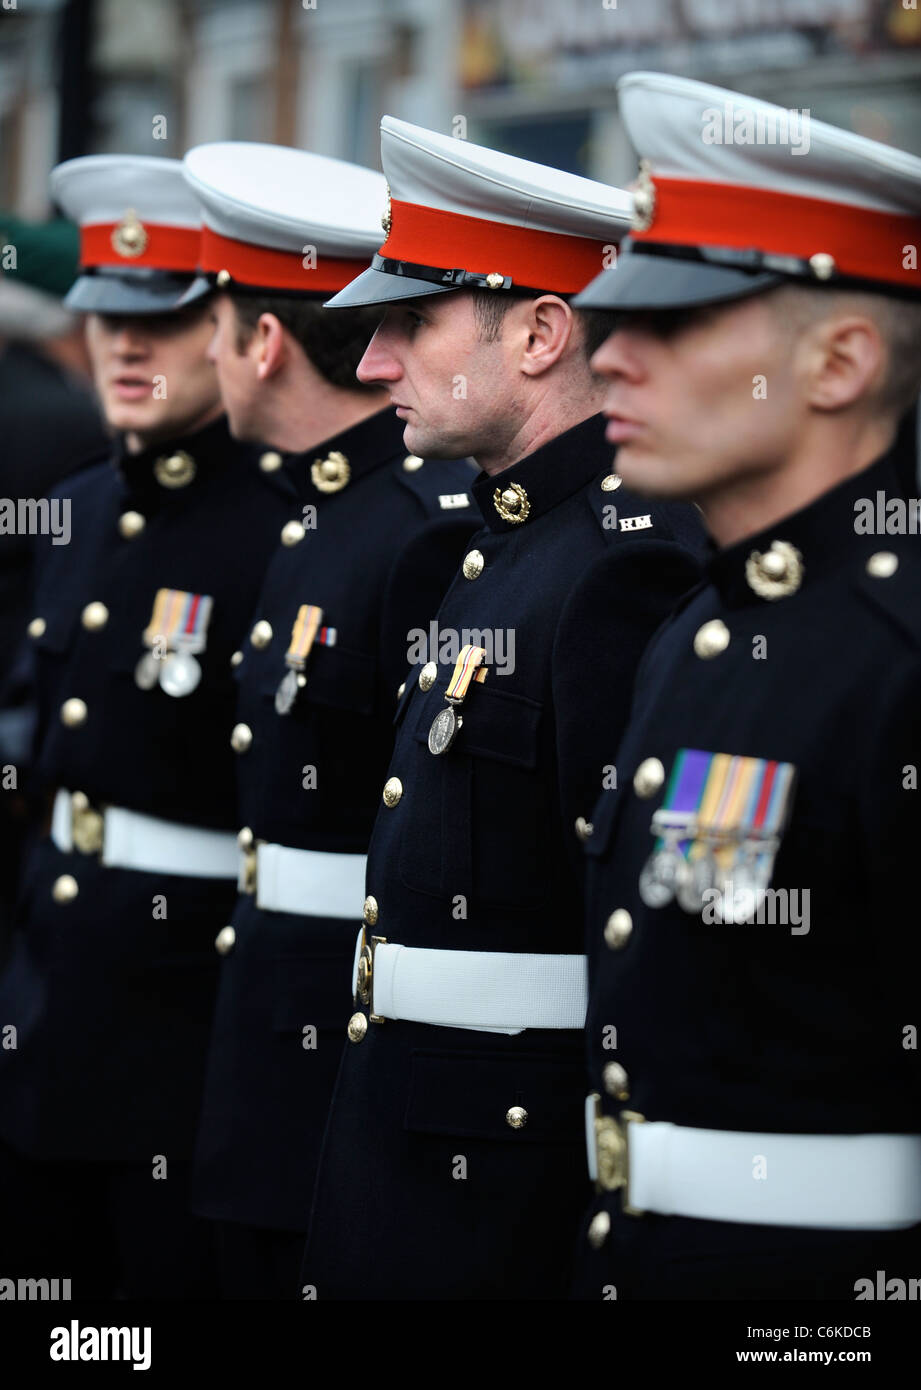 Royal Marines in dress uniform amongst mourners gathered for a ...